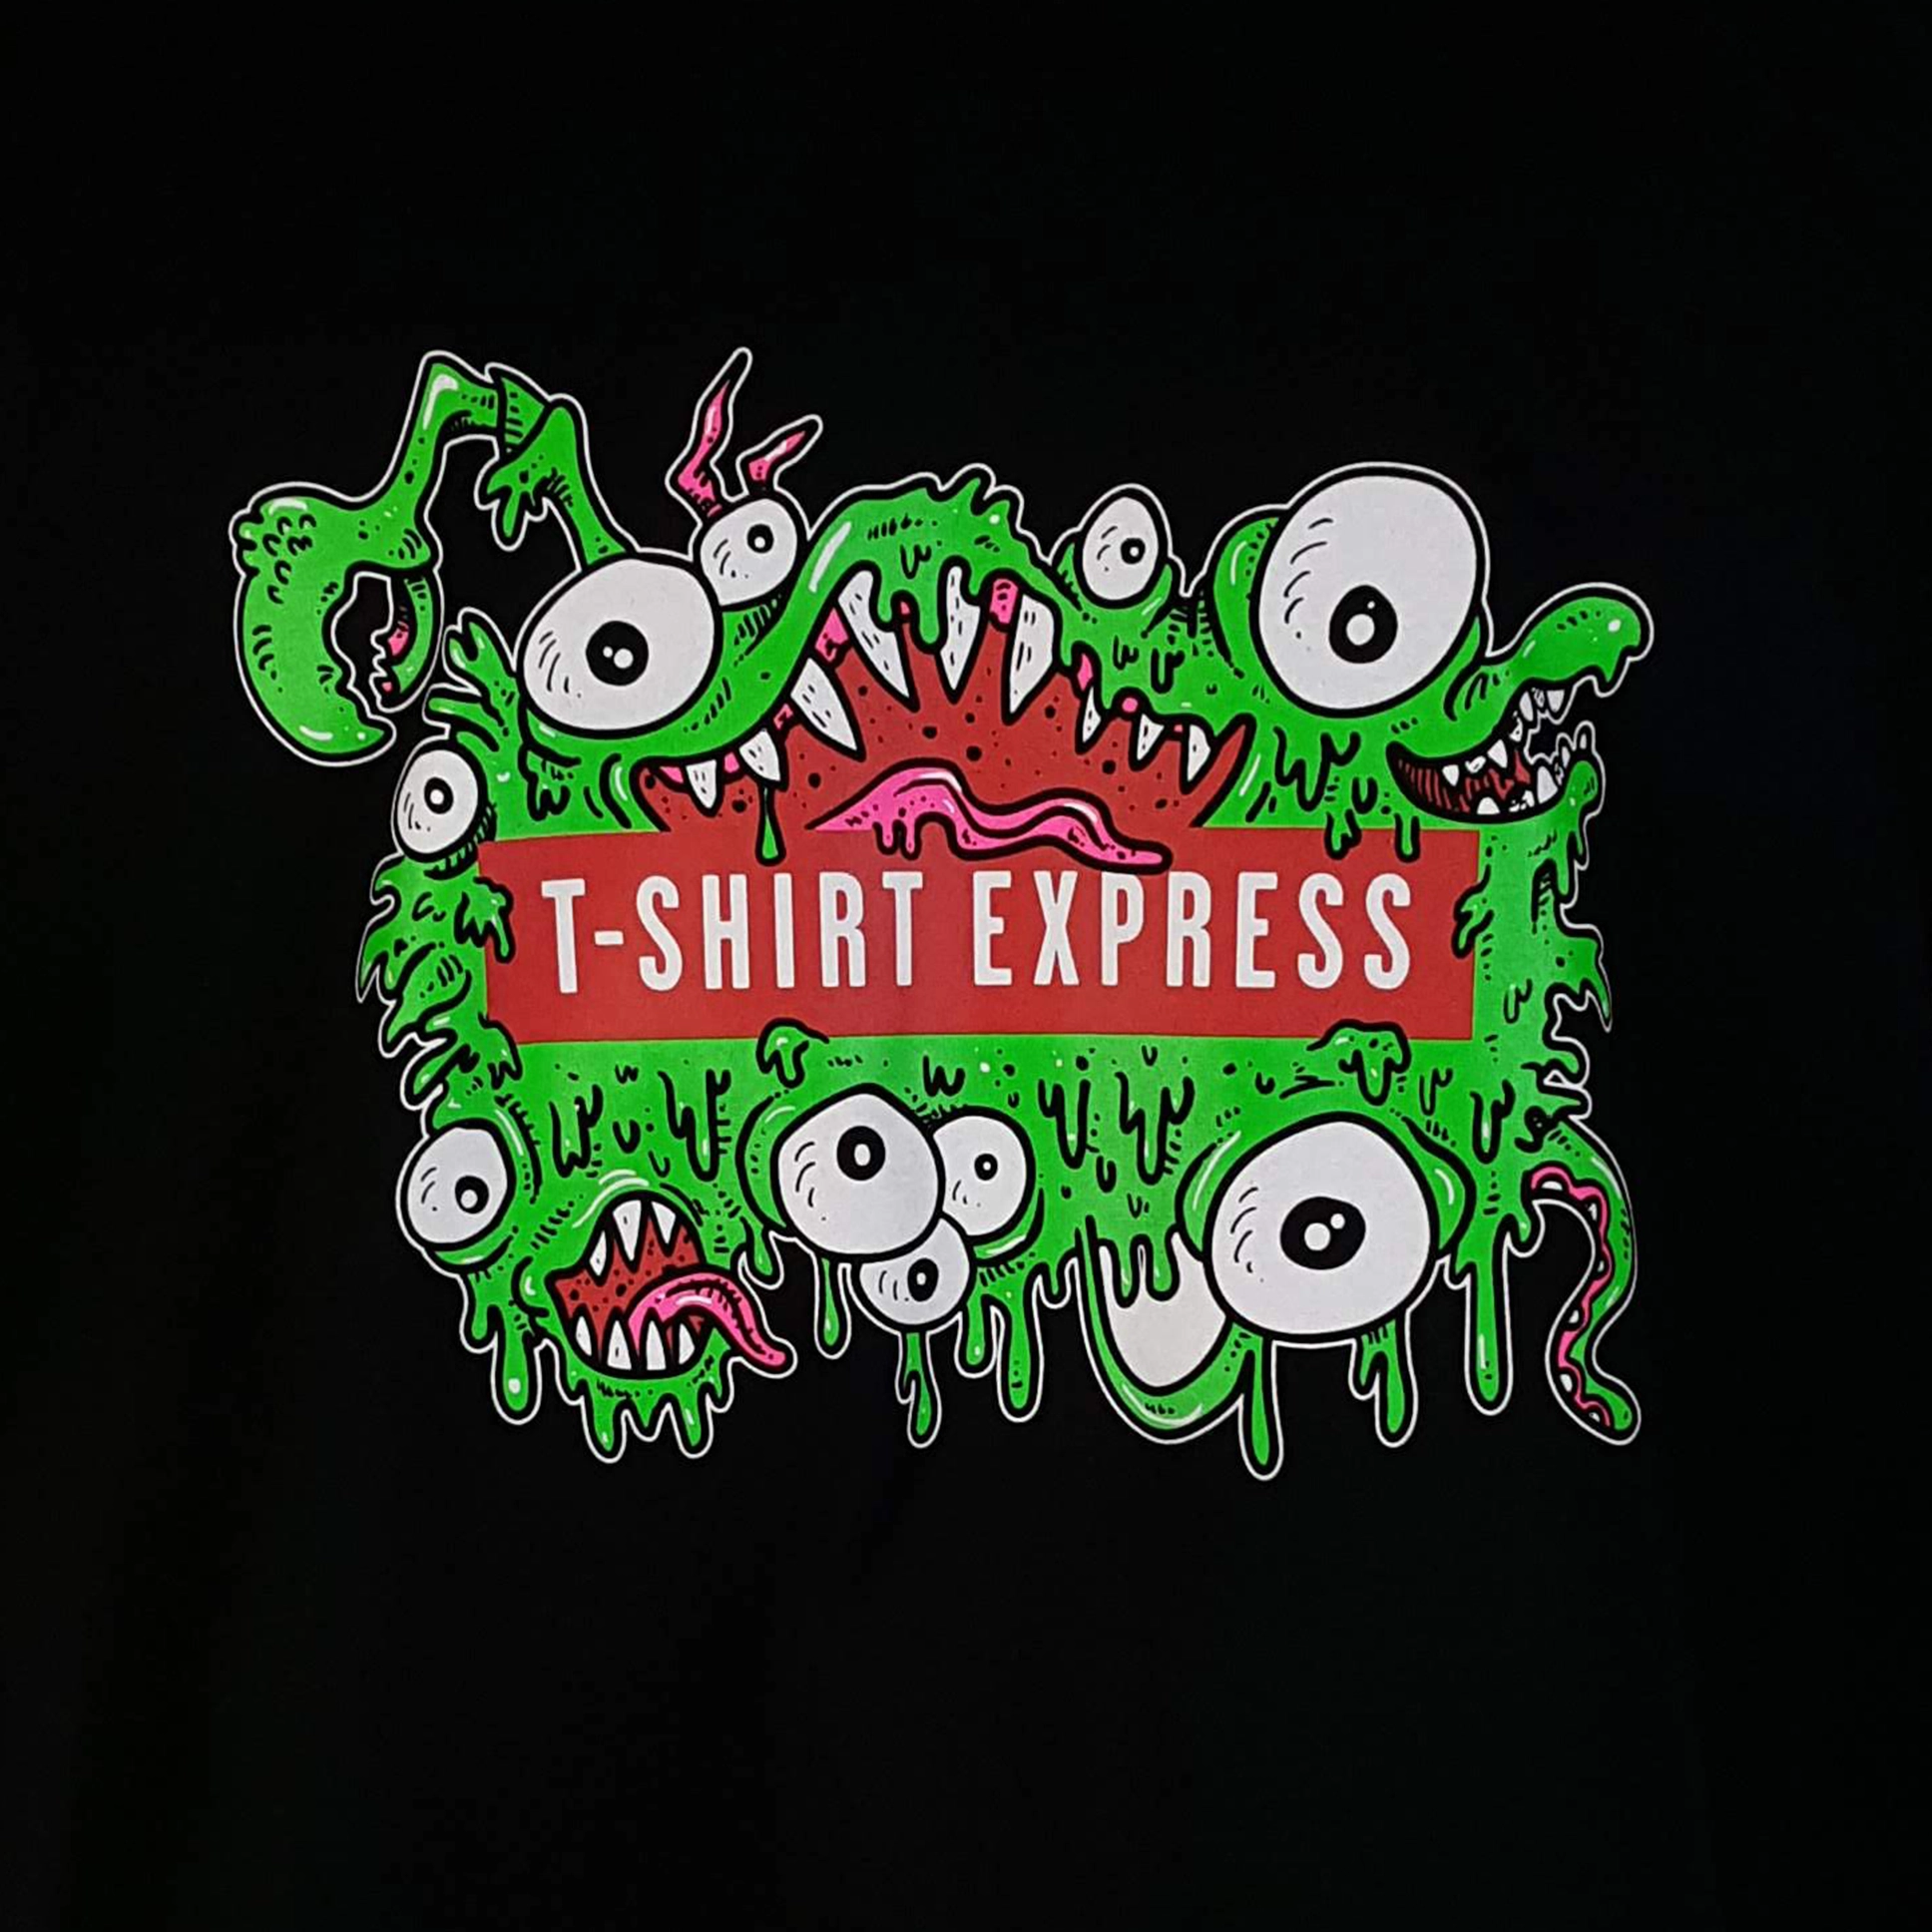 t-shirt express in Concord ohio